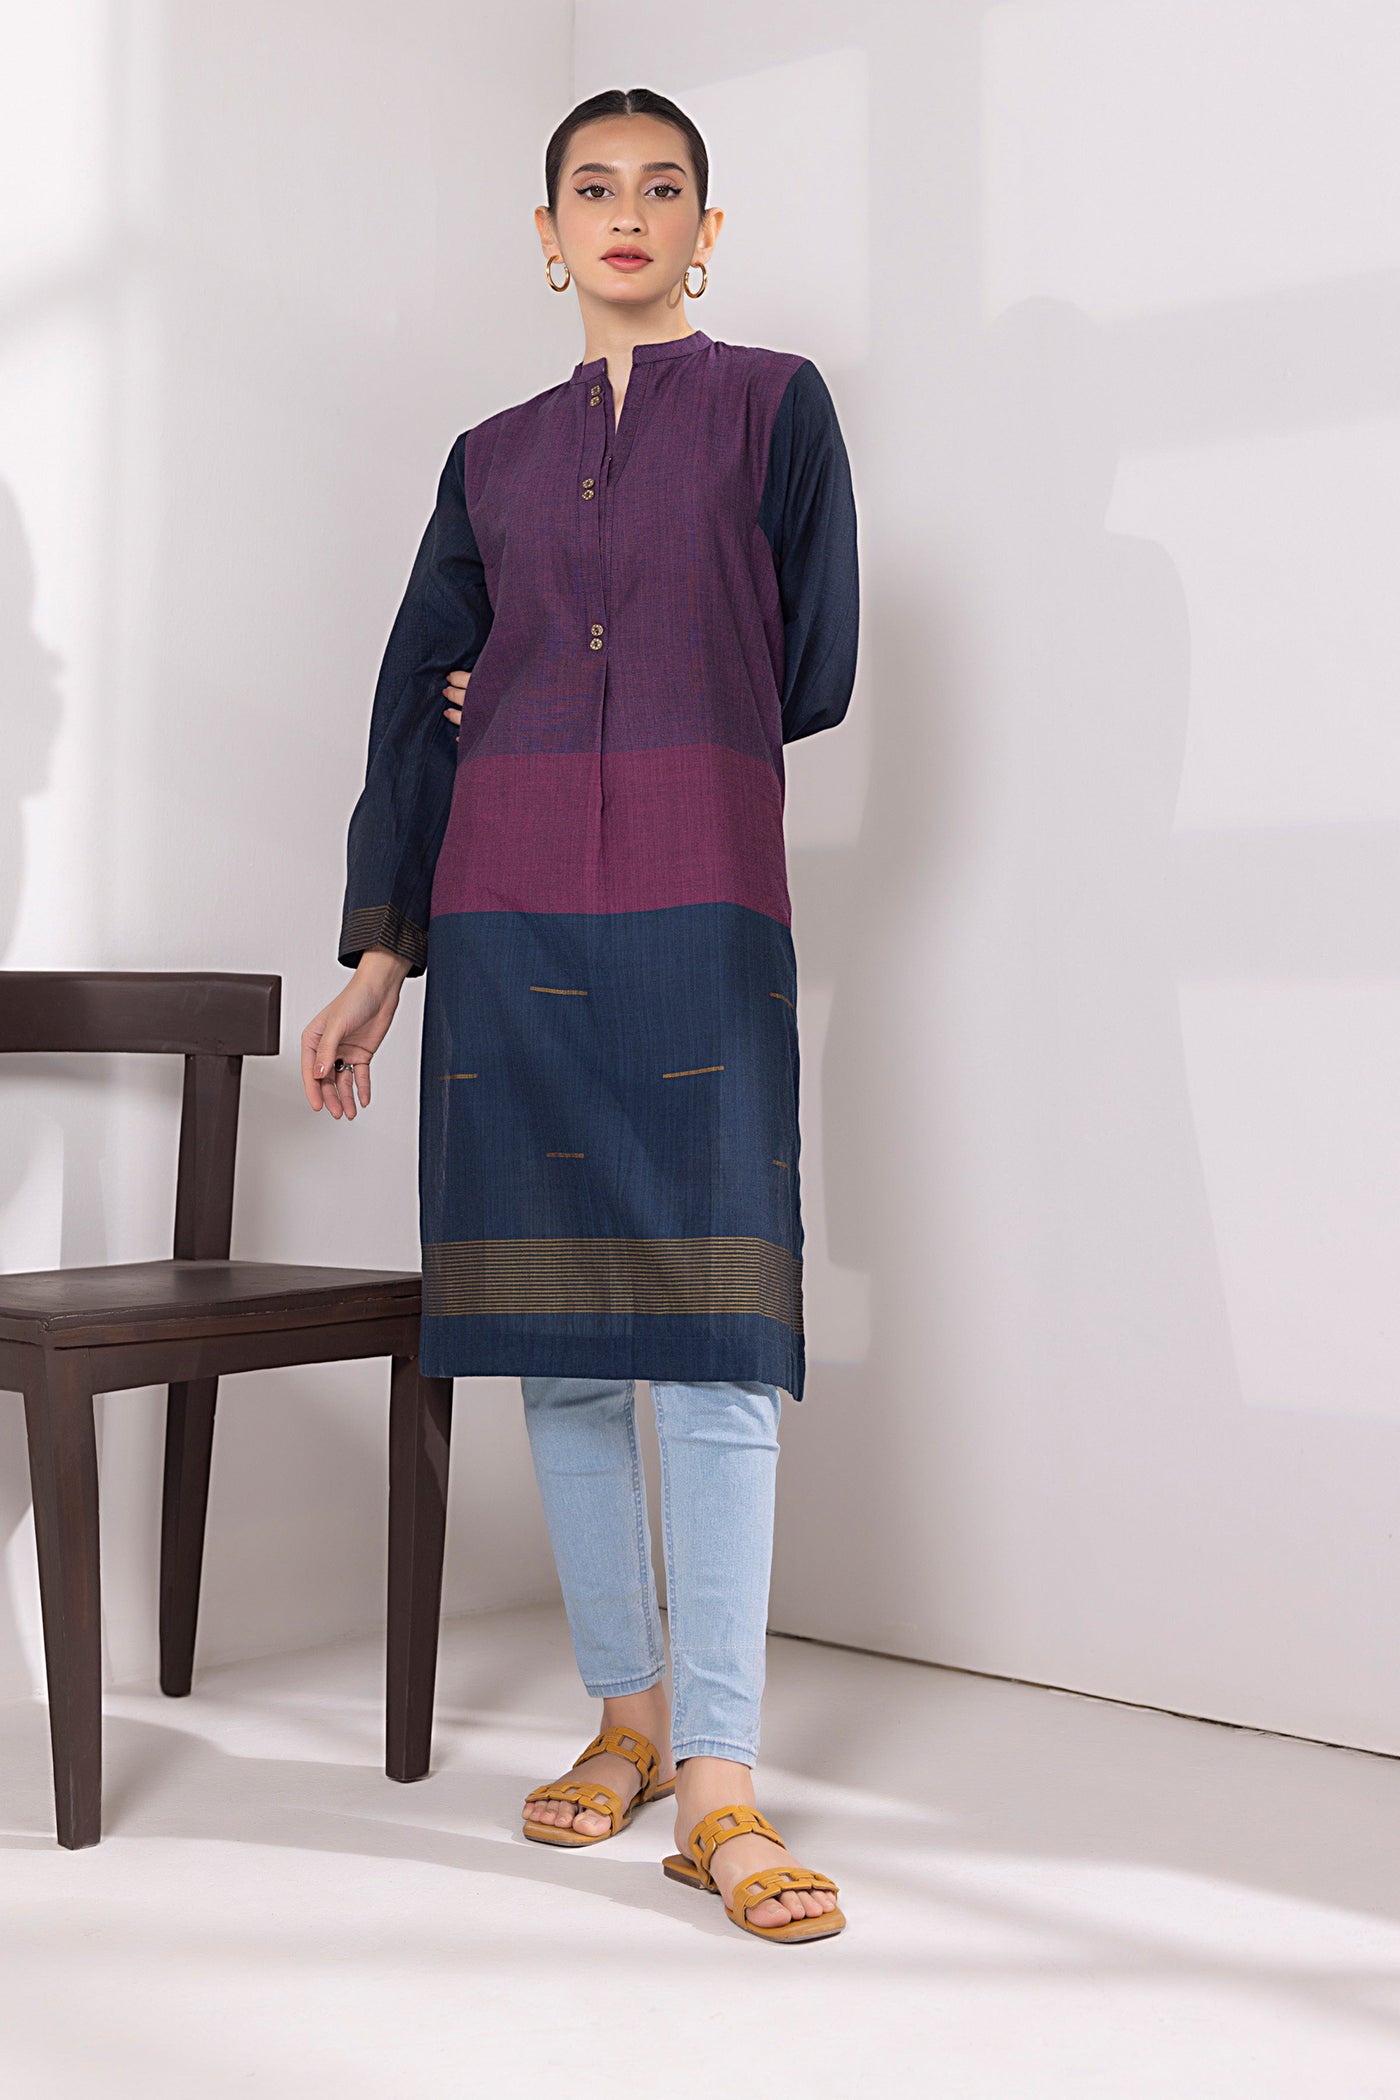 Lakhany 01 Piece Ready to Wear Yarn Dyed Cotton Embroidered Shirt - LG-SK-0192